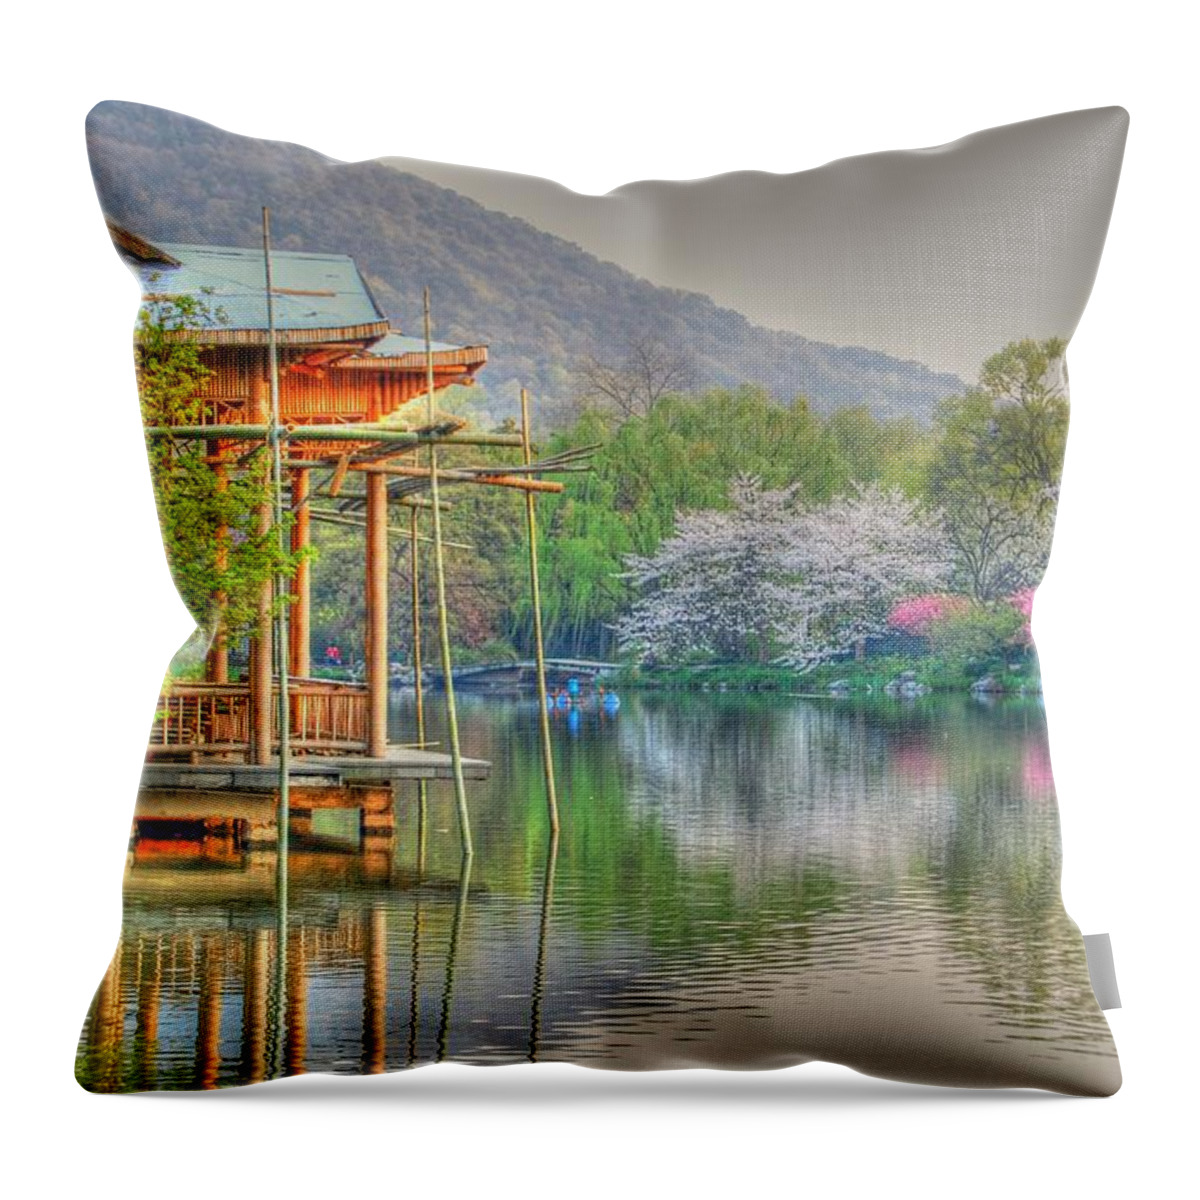 China Throw Pillow featuring the photograph China Lake House by Bill Hamilton